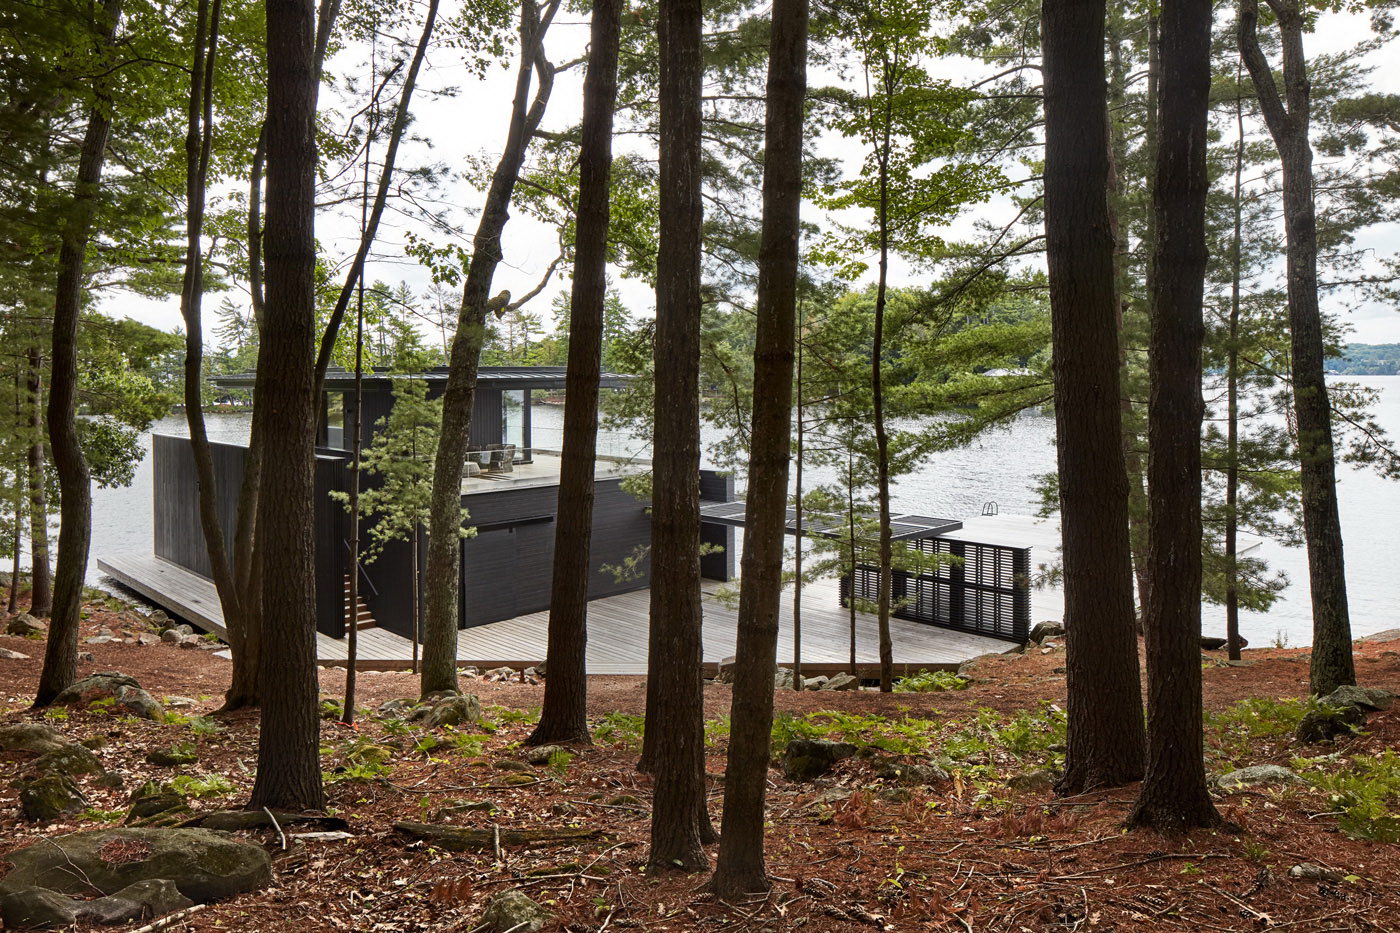 Lake Rosseau Boathouse – Guest Residence by Akb Architects